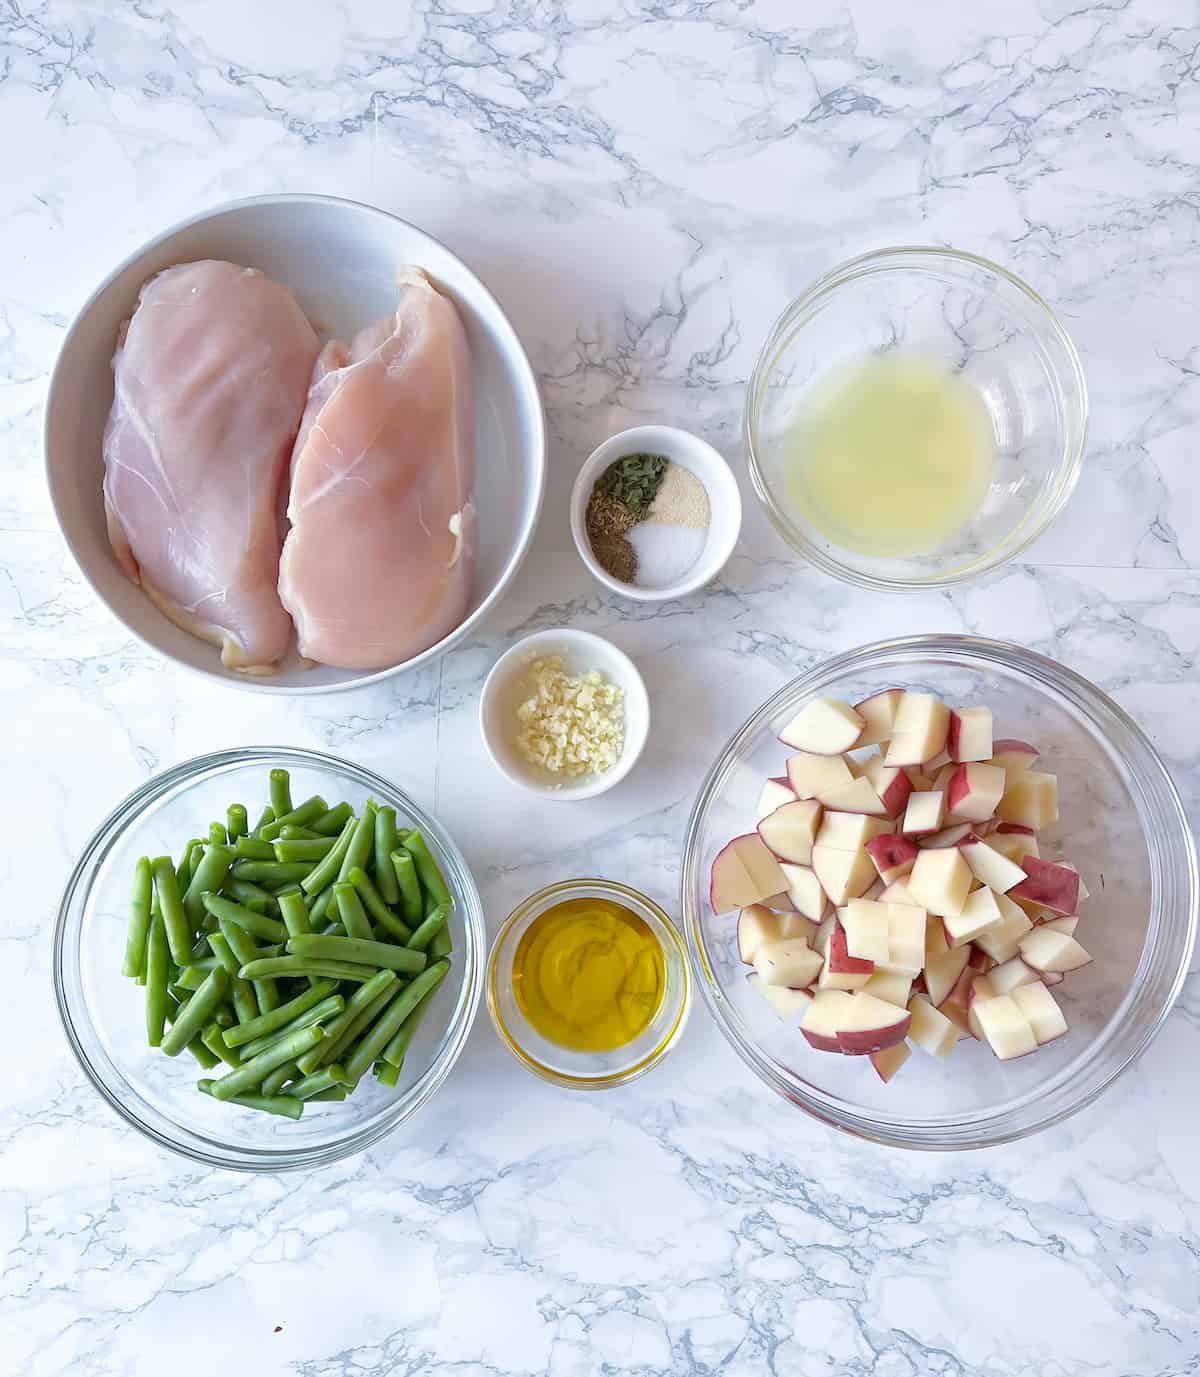 Ingredients-chopped-for-slow-cooker-chicken-green-beans-and-potatoes-on-a-marble-table-1